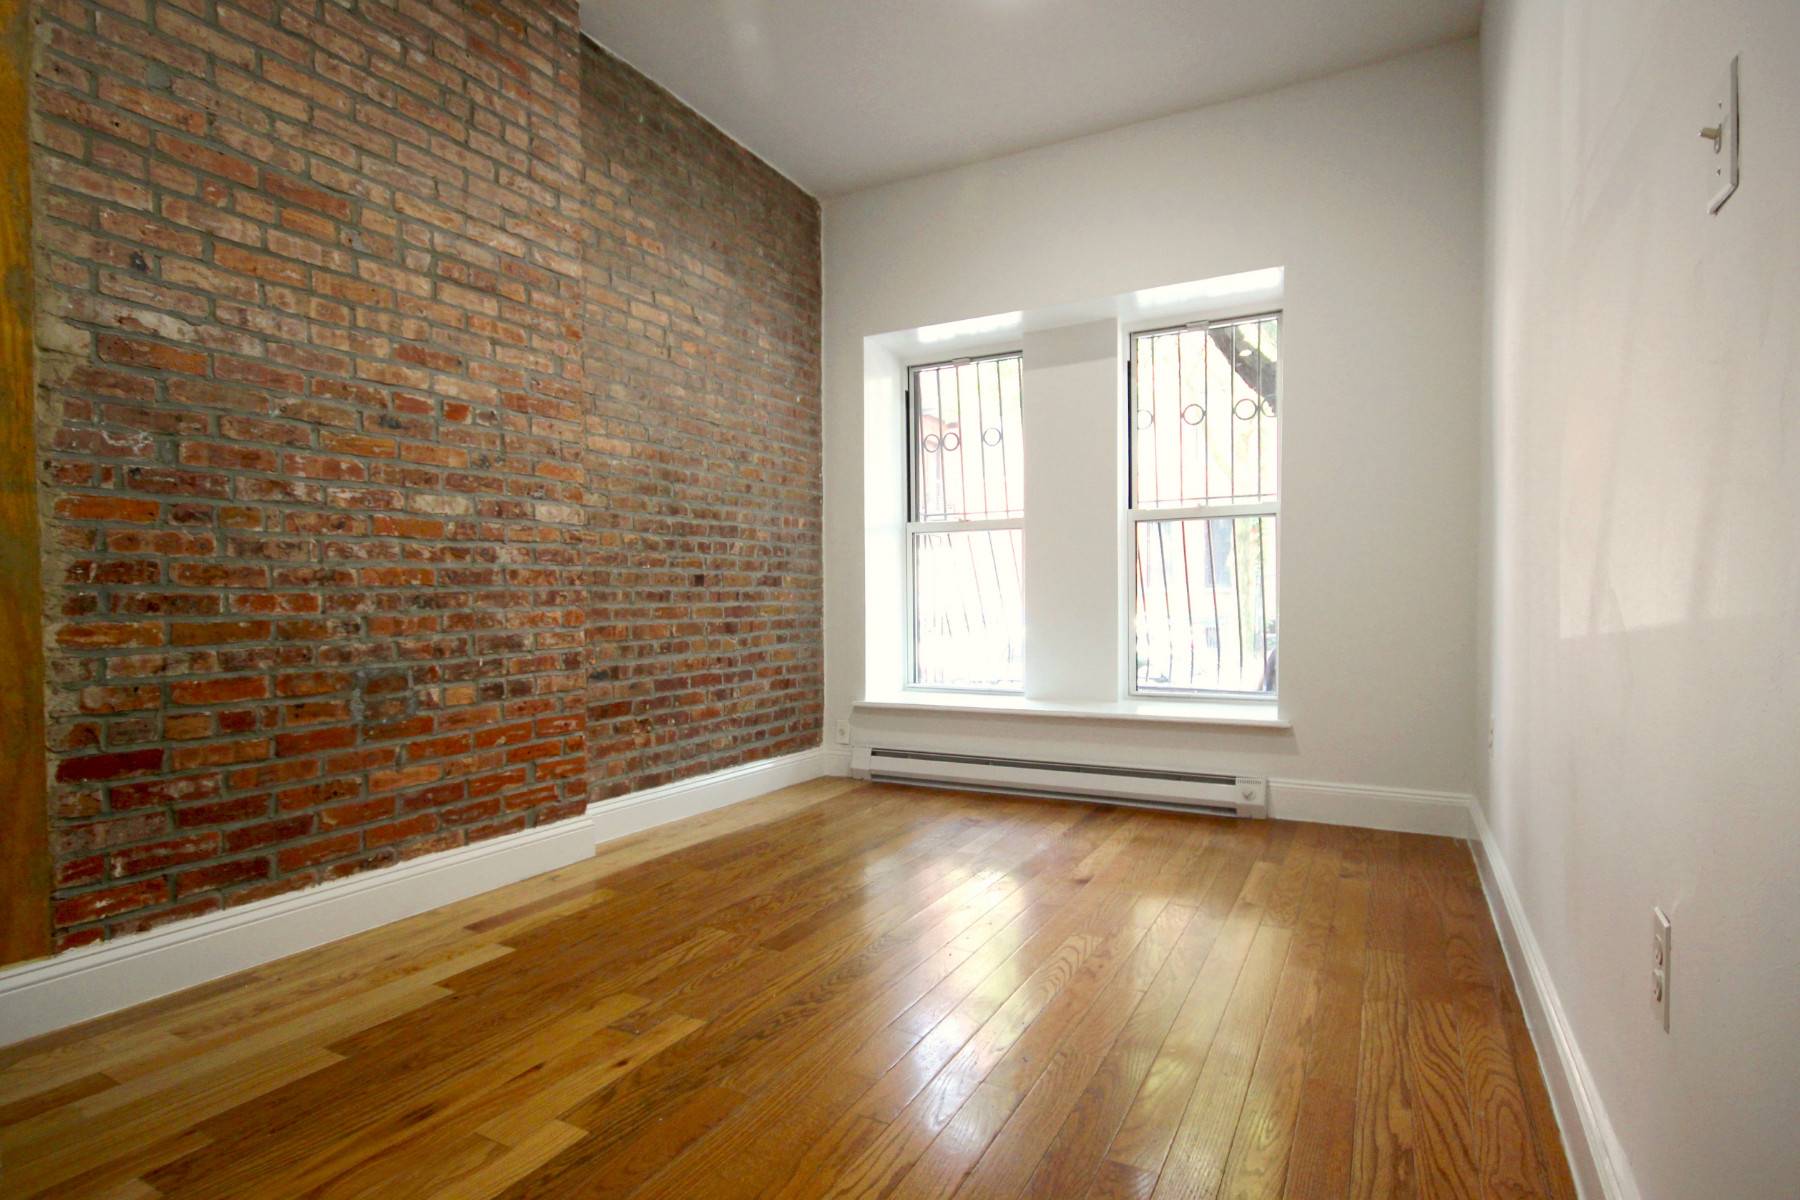 NO FEE Sunny Remodeled Duplex Apartment on a Tree Lined street in Fort Greene.